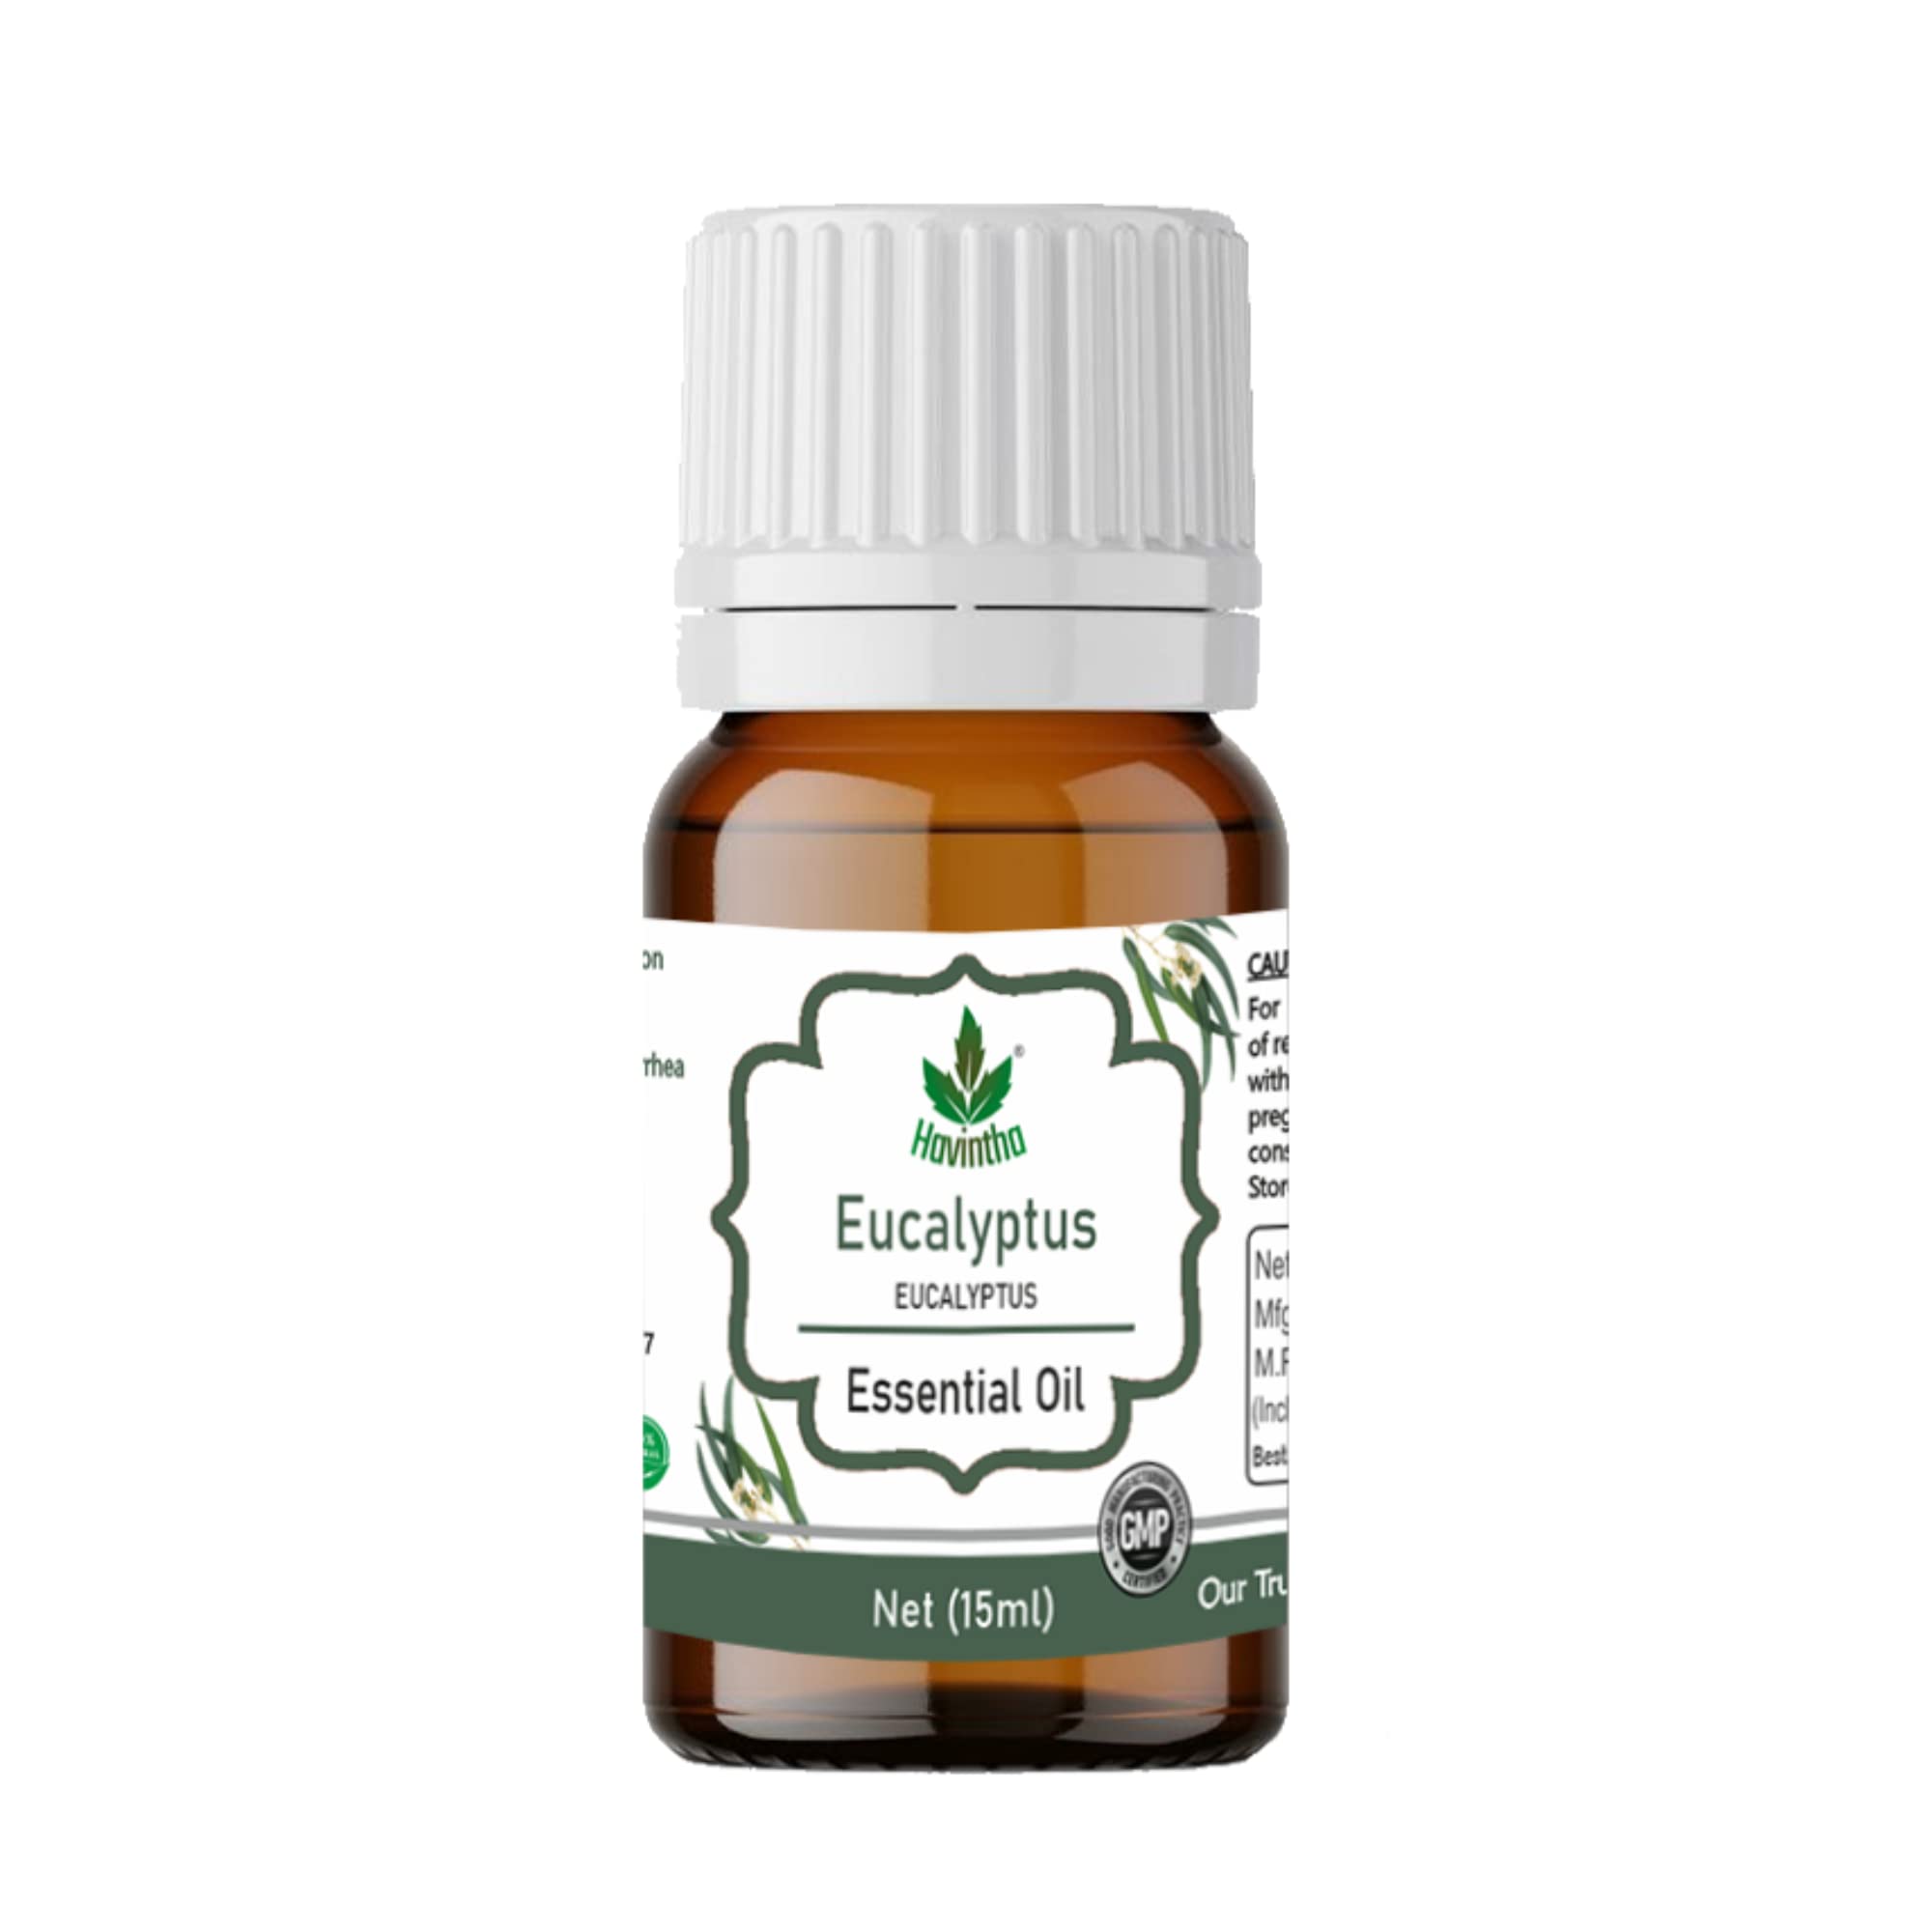 Havintha's Natural Eucalyptus Essential Oil for Steam Inhalation, Massage, Aromatherapy, Skin Therapy, Hair Care - 15ml